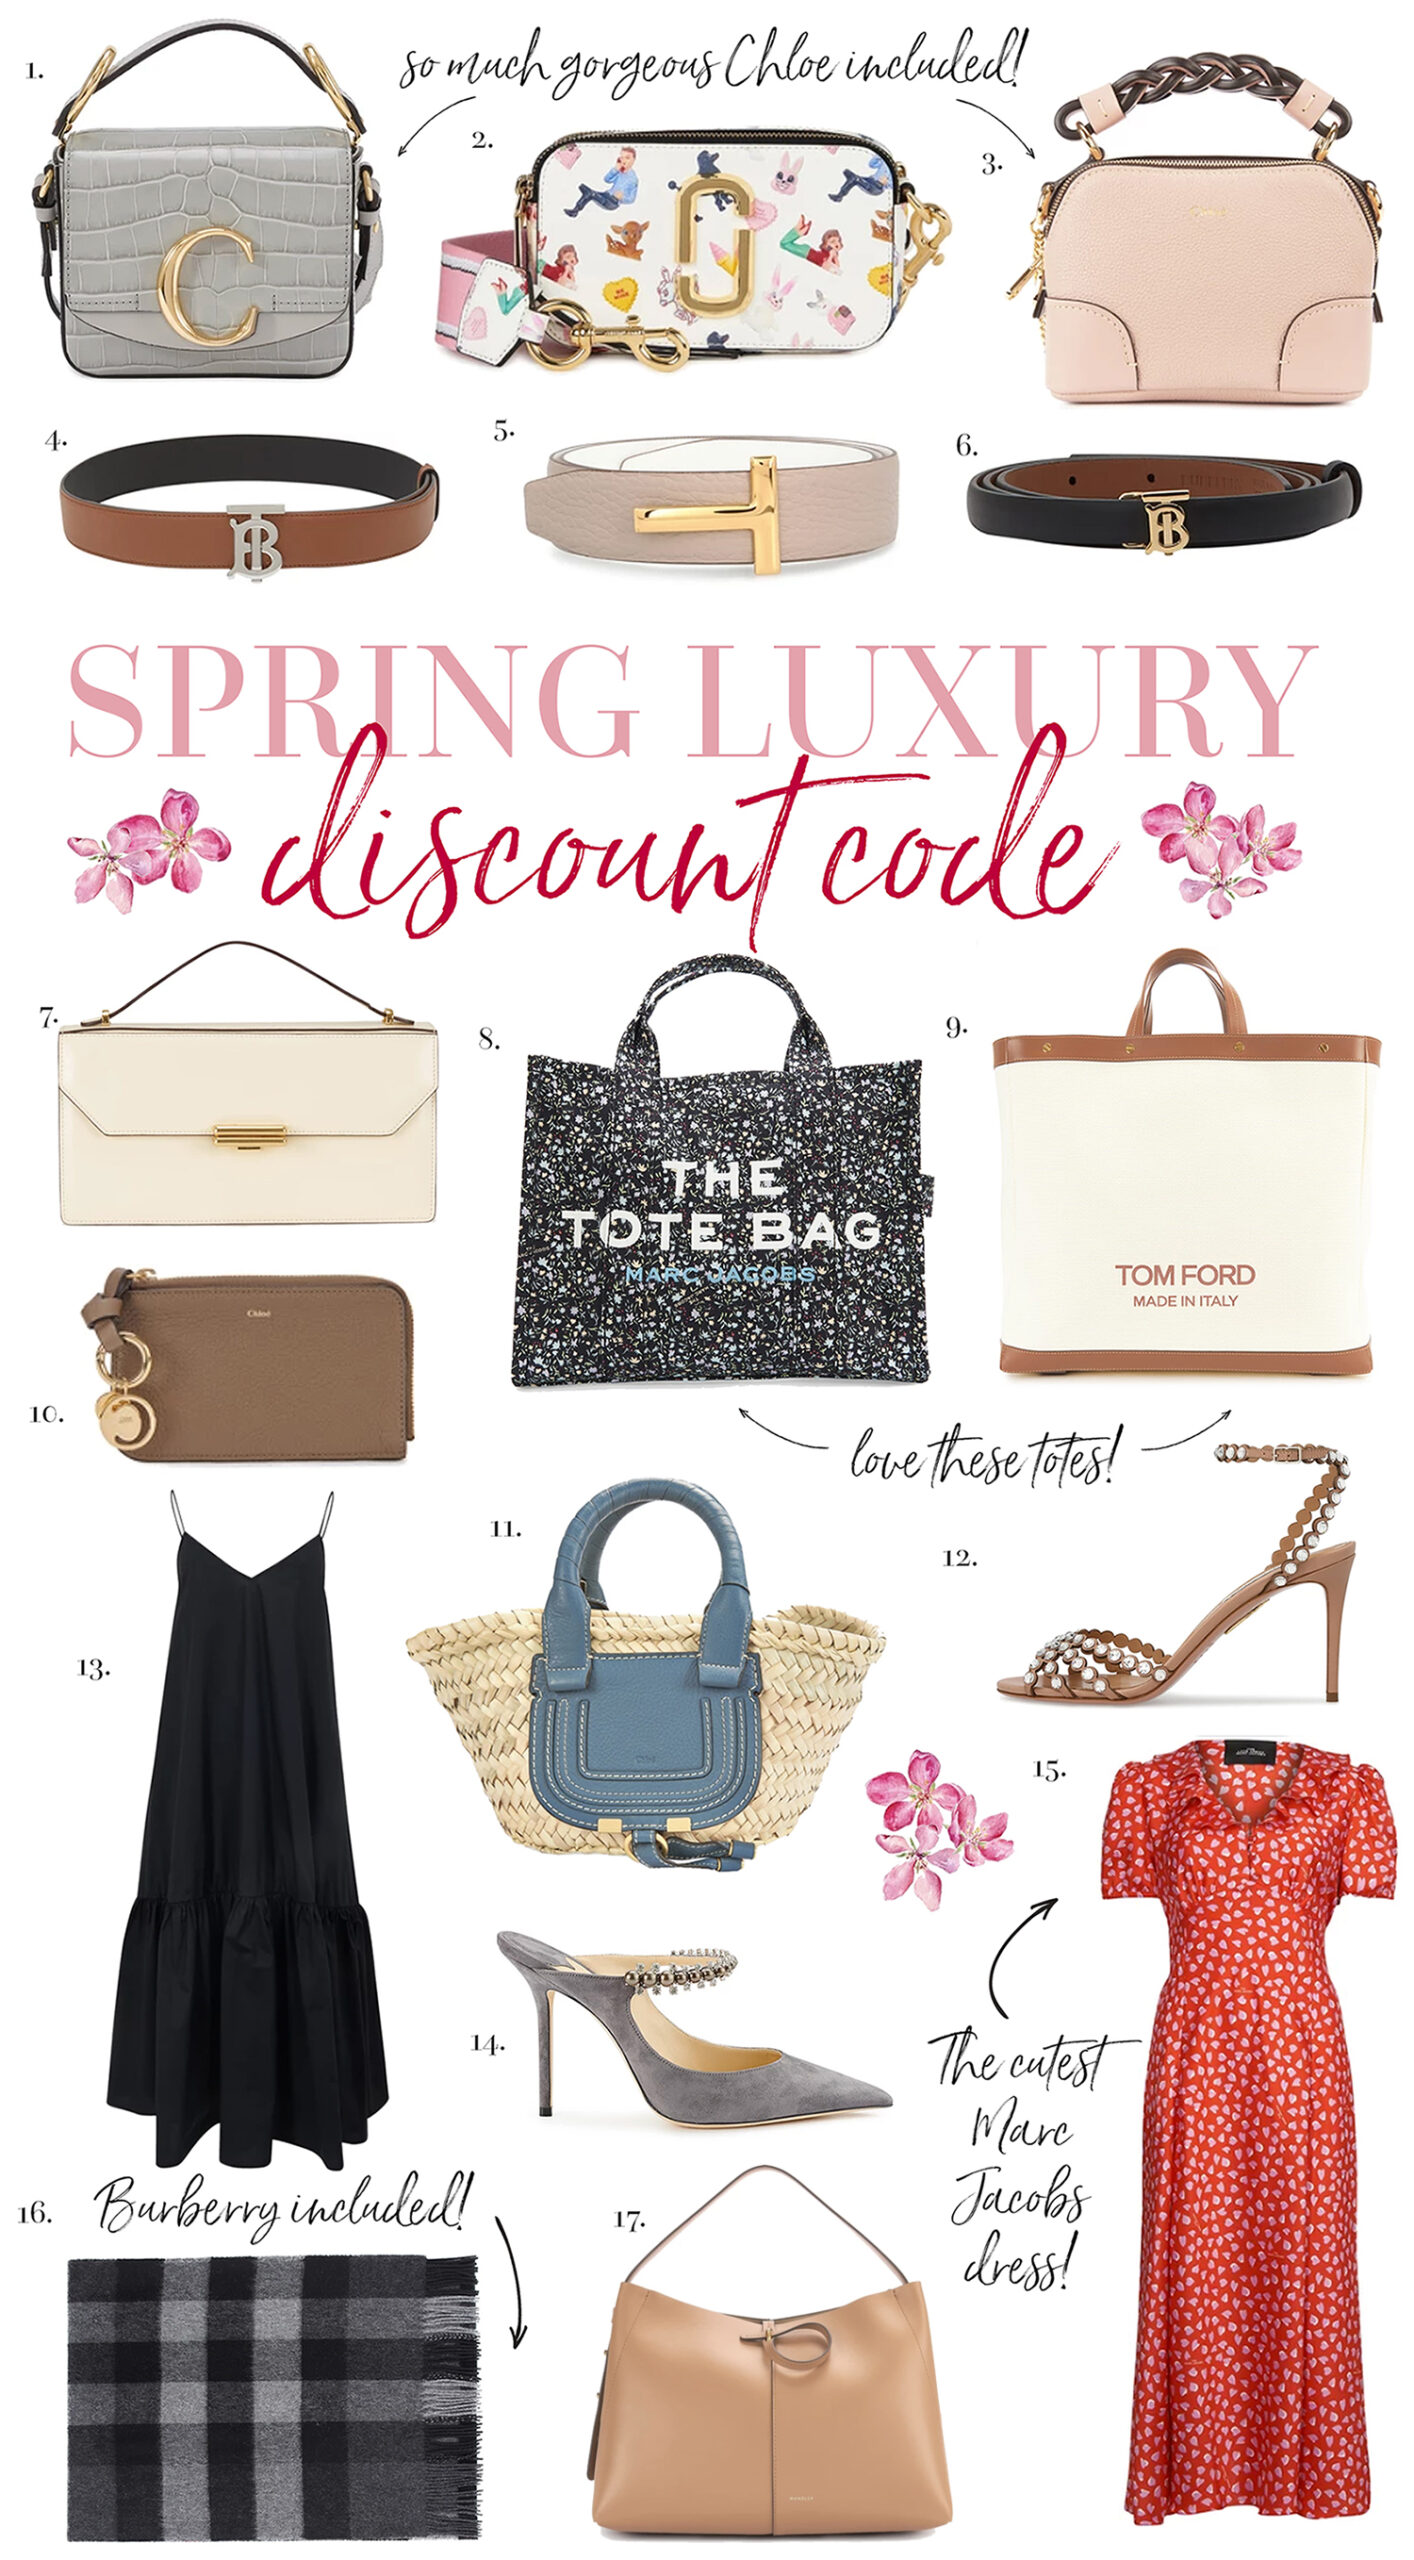 Spring Luxury Offer at 24s.com - Chase Amie